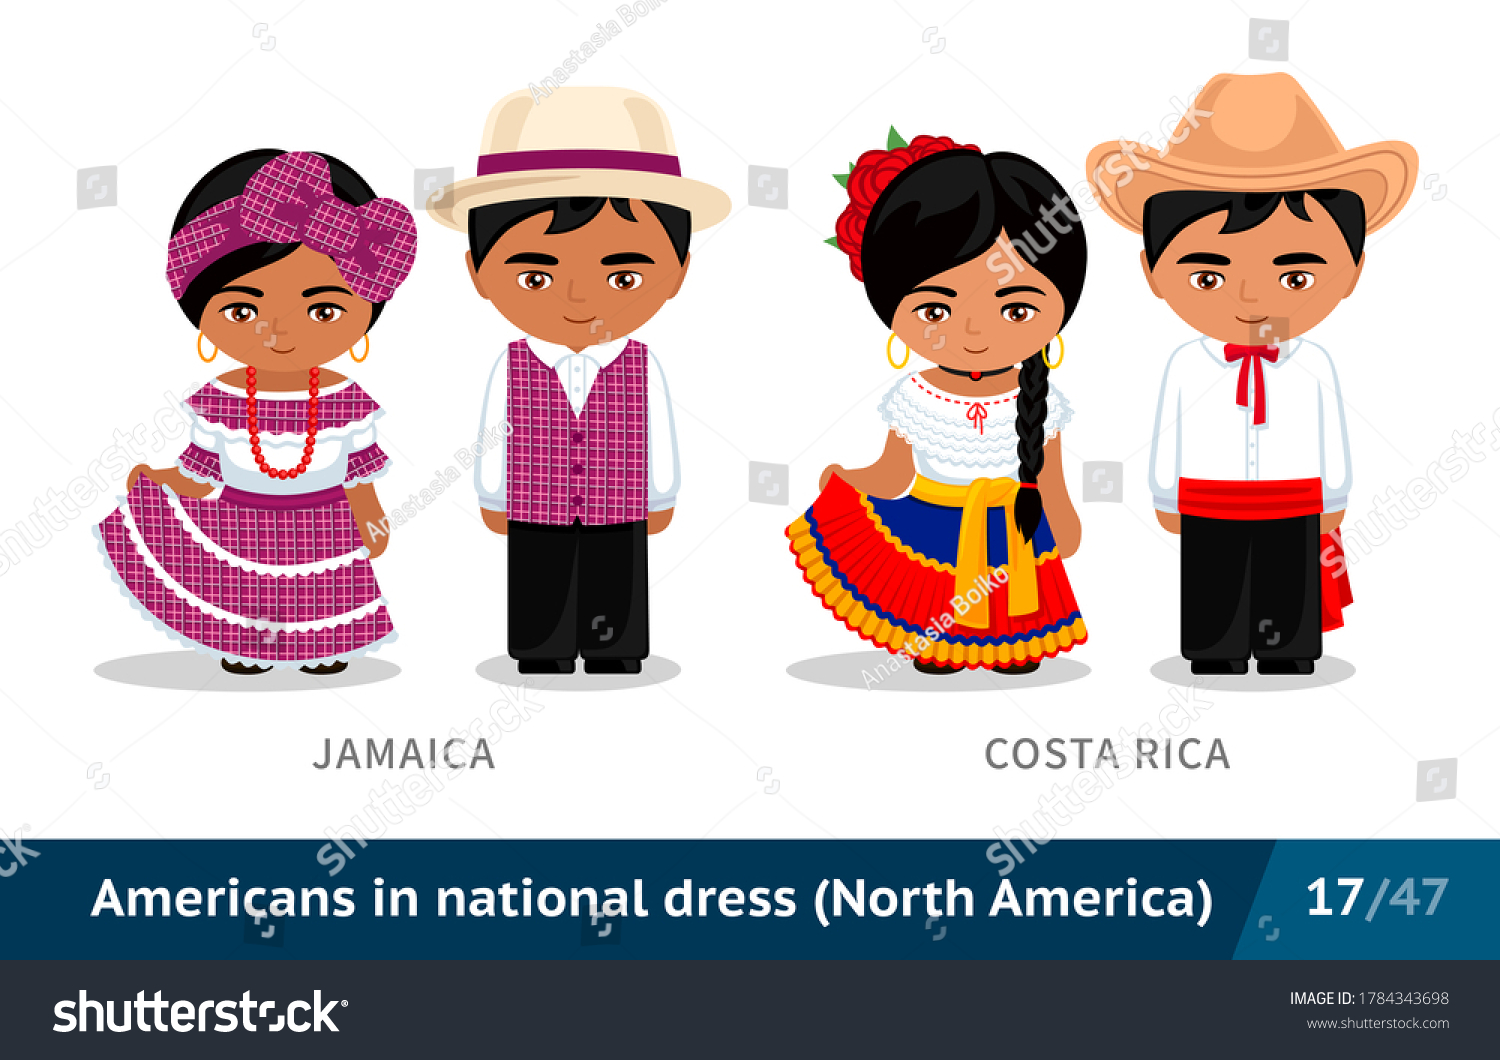 National costume north america Images, Stock Photos & Vectors ...